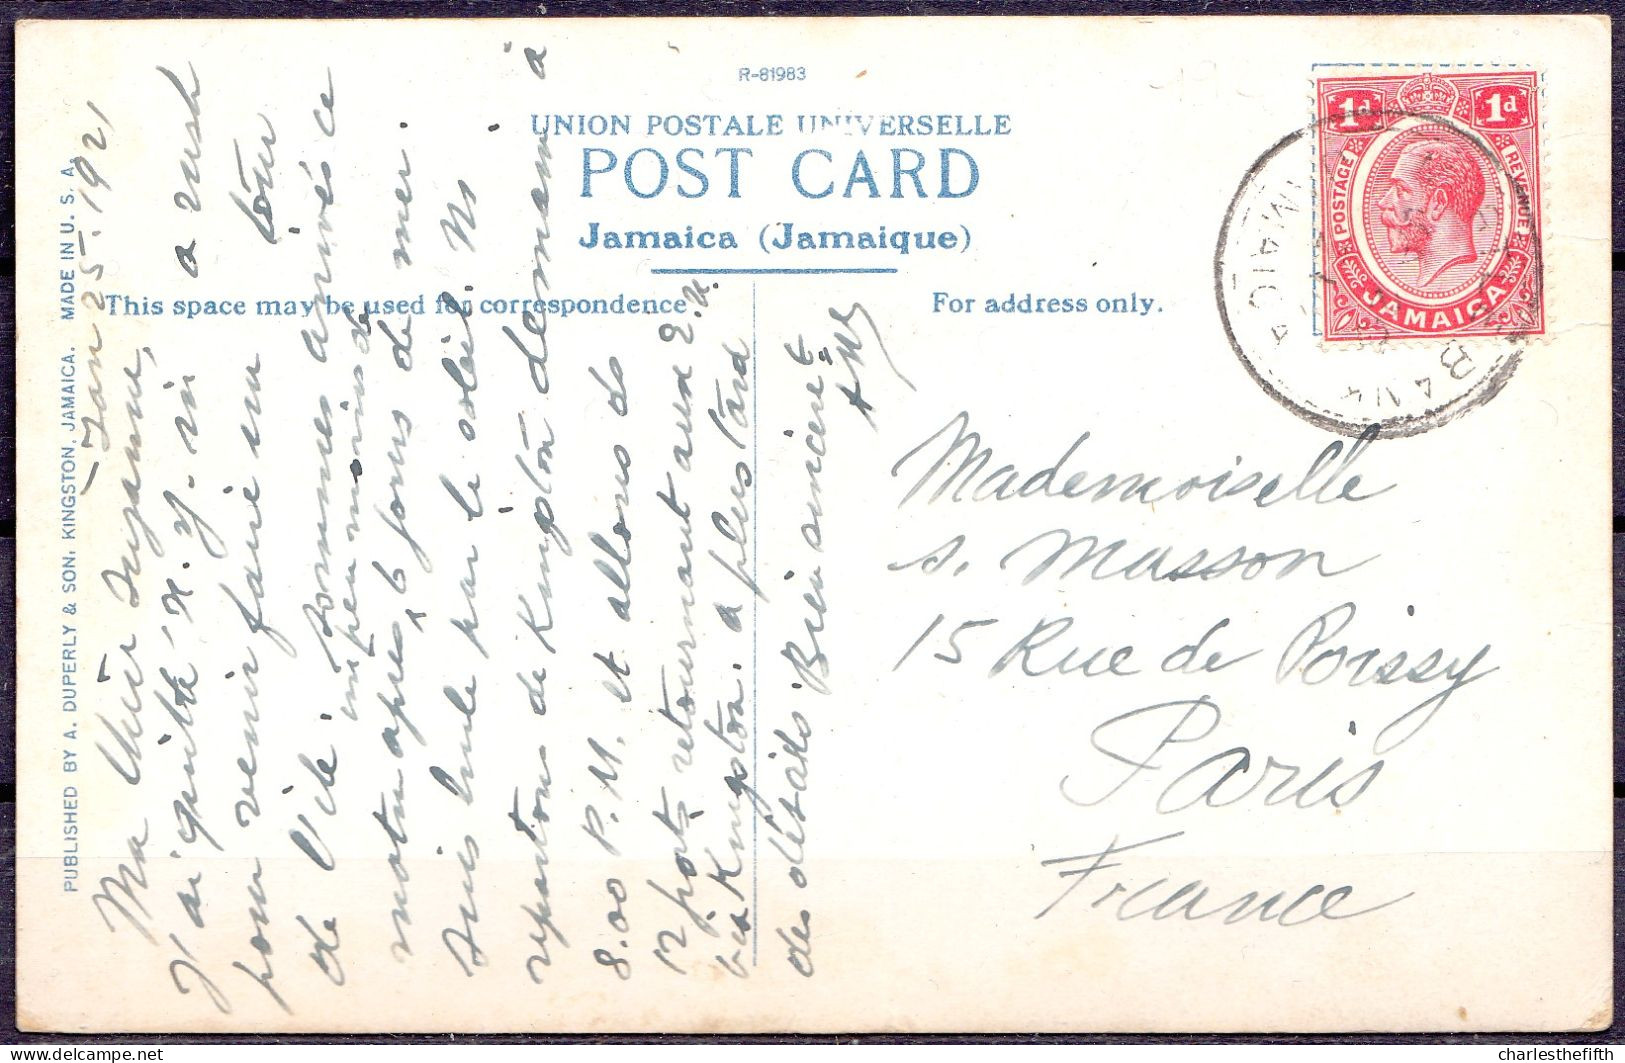 GREETINGS FROM JAMAICA 1921 ( = British West Indies - See Stamp ) - KING STREET KINGSTON - PUBLIC BUILDING - Jamaïque